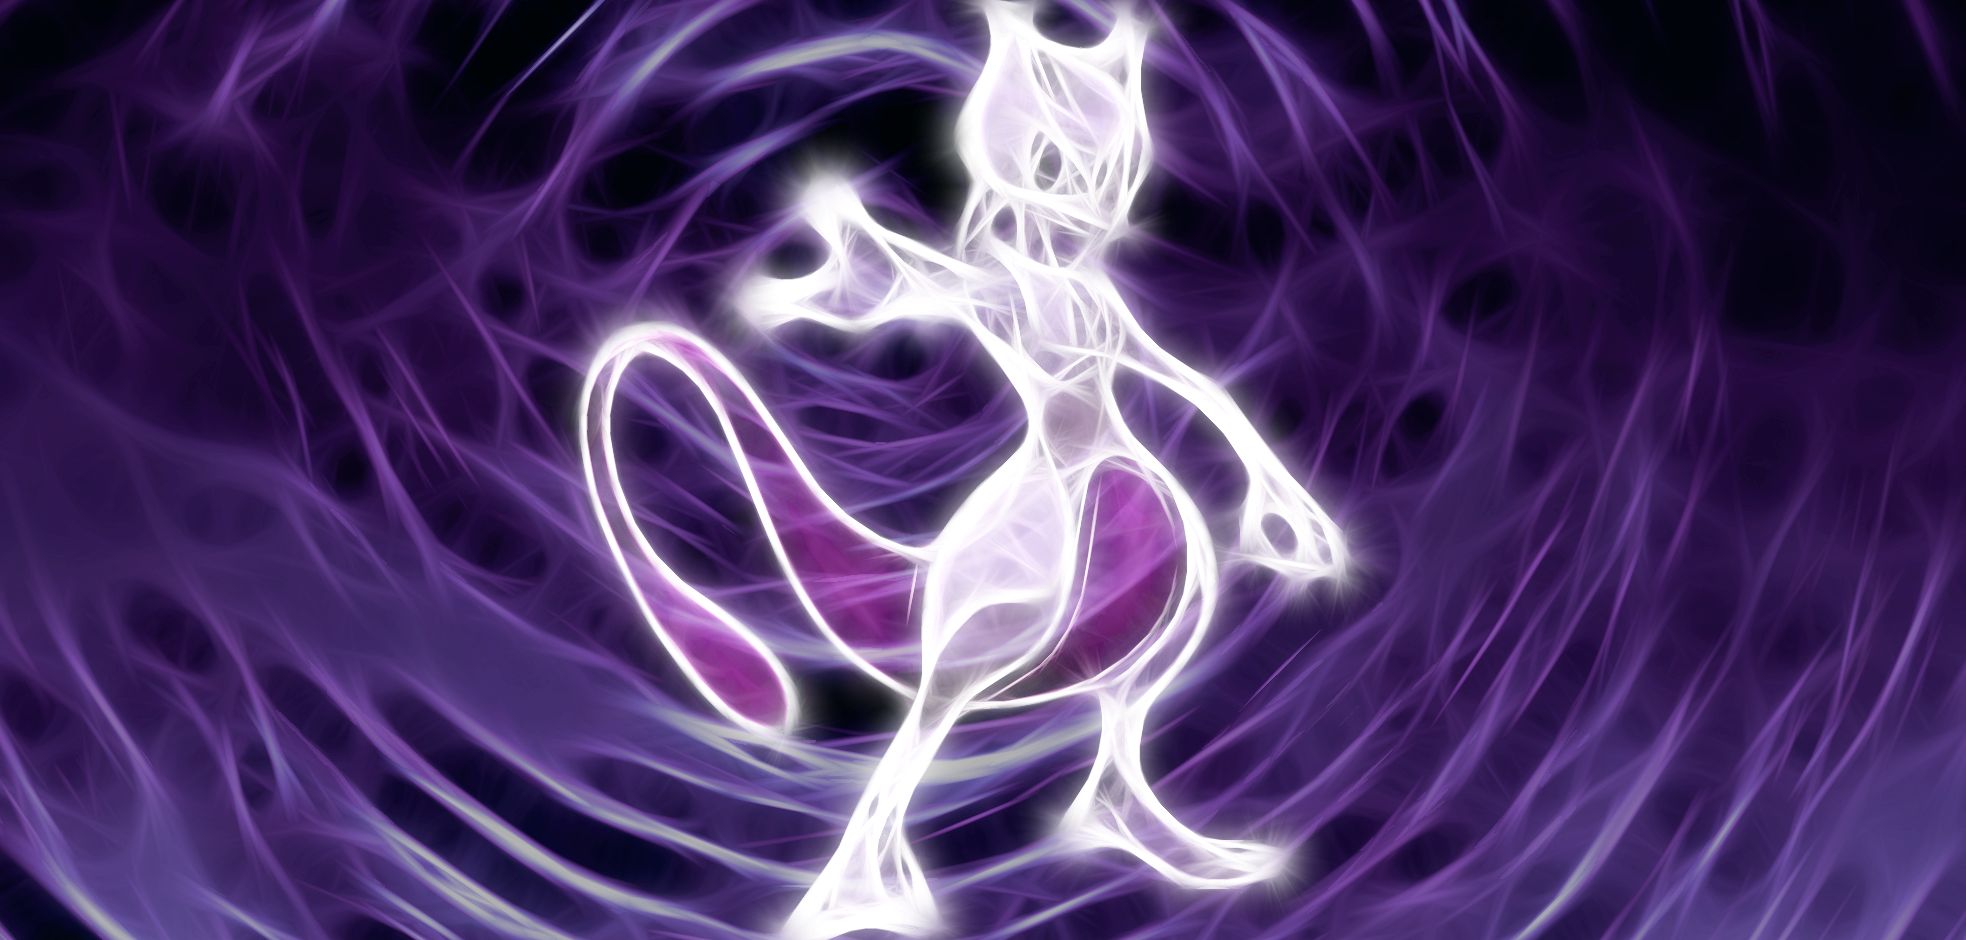 mewtwo_wallpaper_by_porkymeansbusiness-d5khqcg